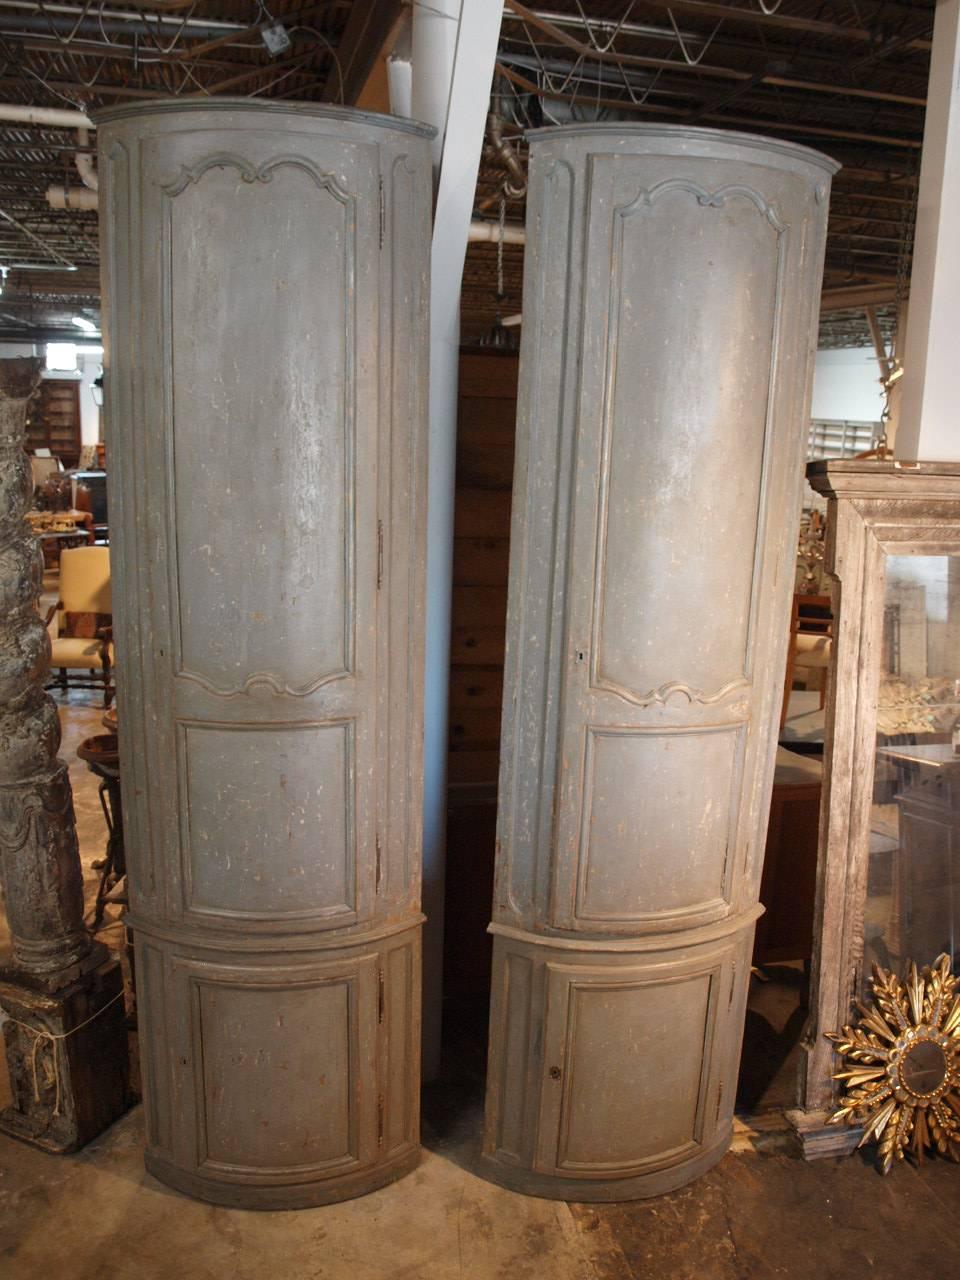 An outstanding and monumental pair of 18th century French corner cabinets from Pau, France. Their tremendous scale makes these pieces indeed remarkable. Wonderful painted finish with rich texture in soft hues of grey. Ample shelving to the interior.